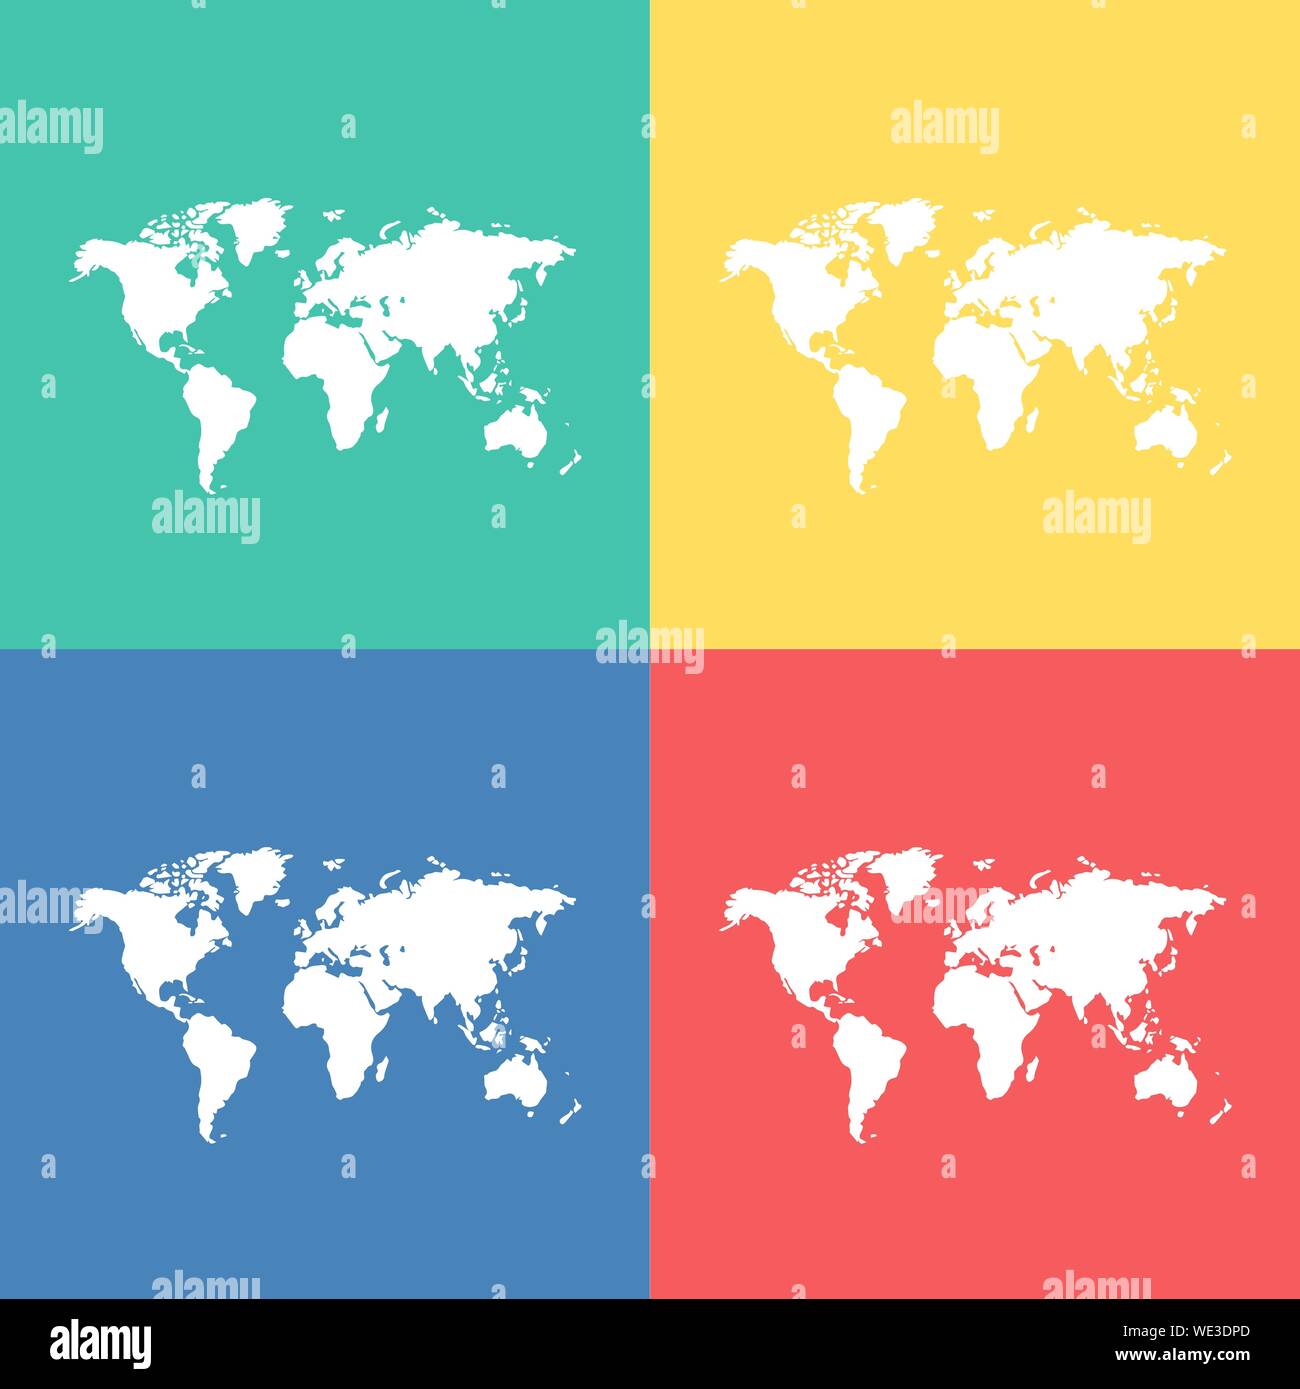 set of different colorful world map illustration vector Stock Vector